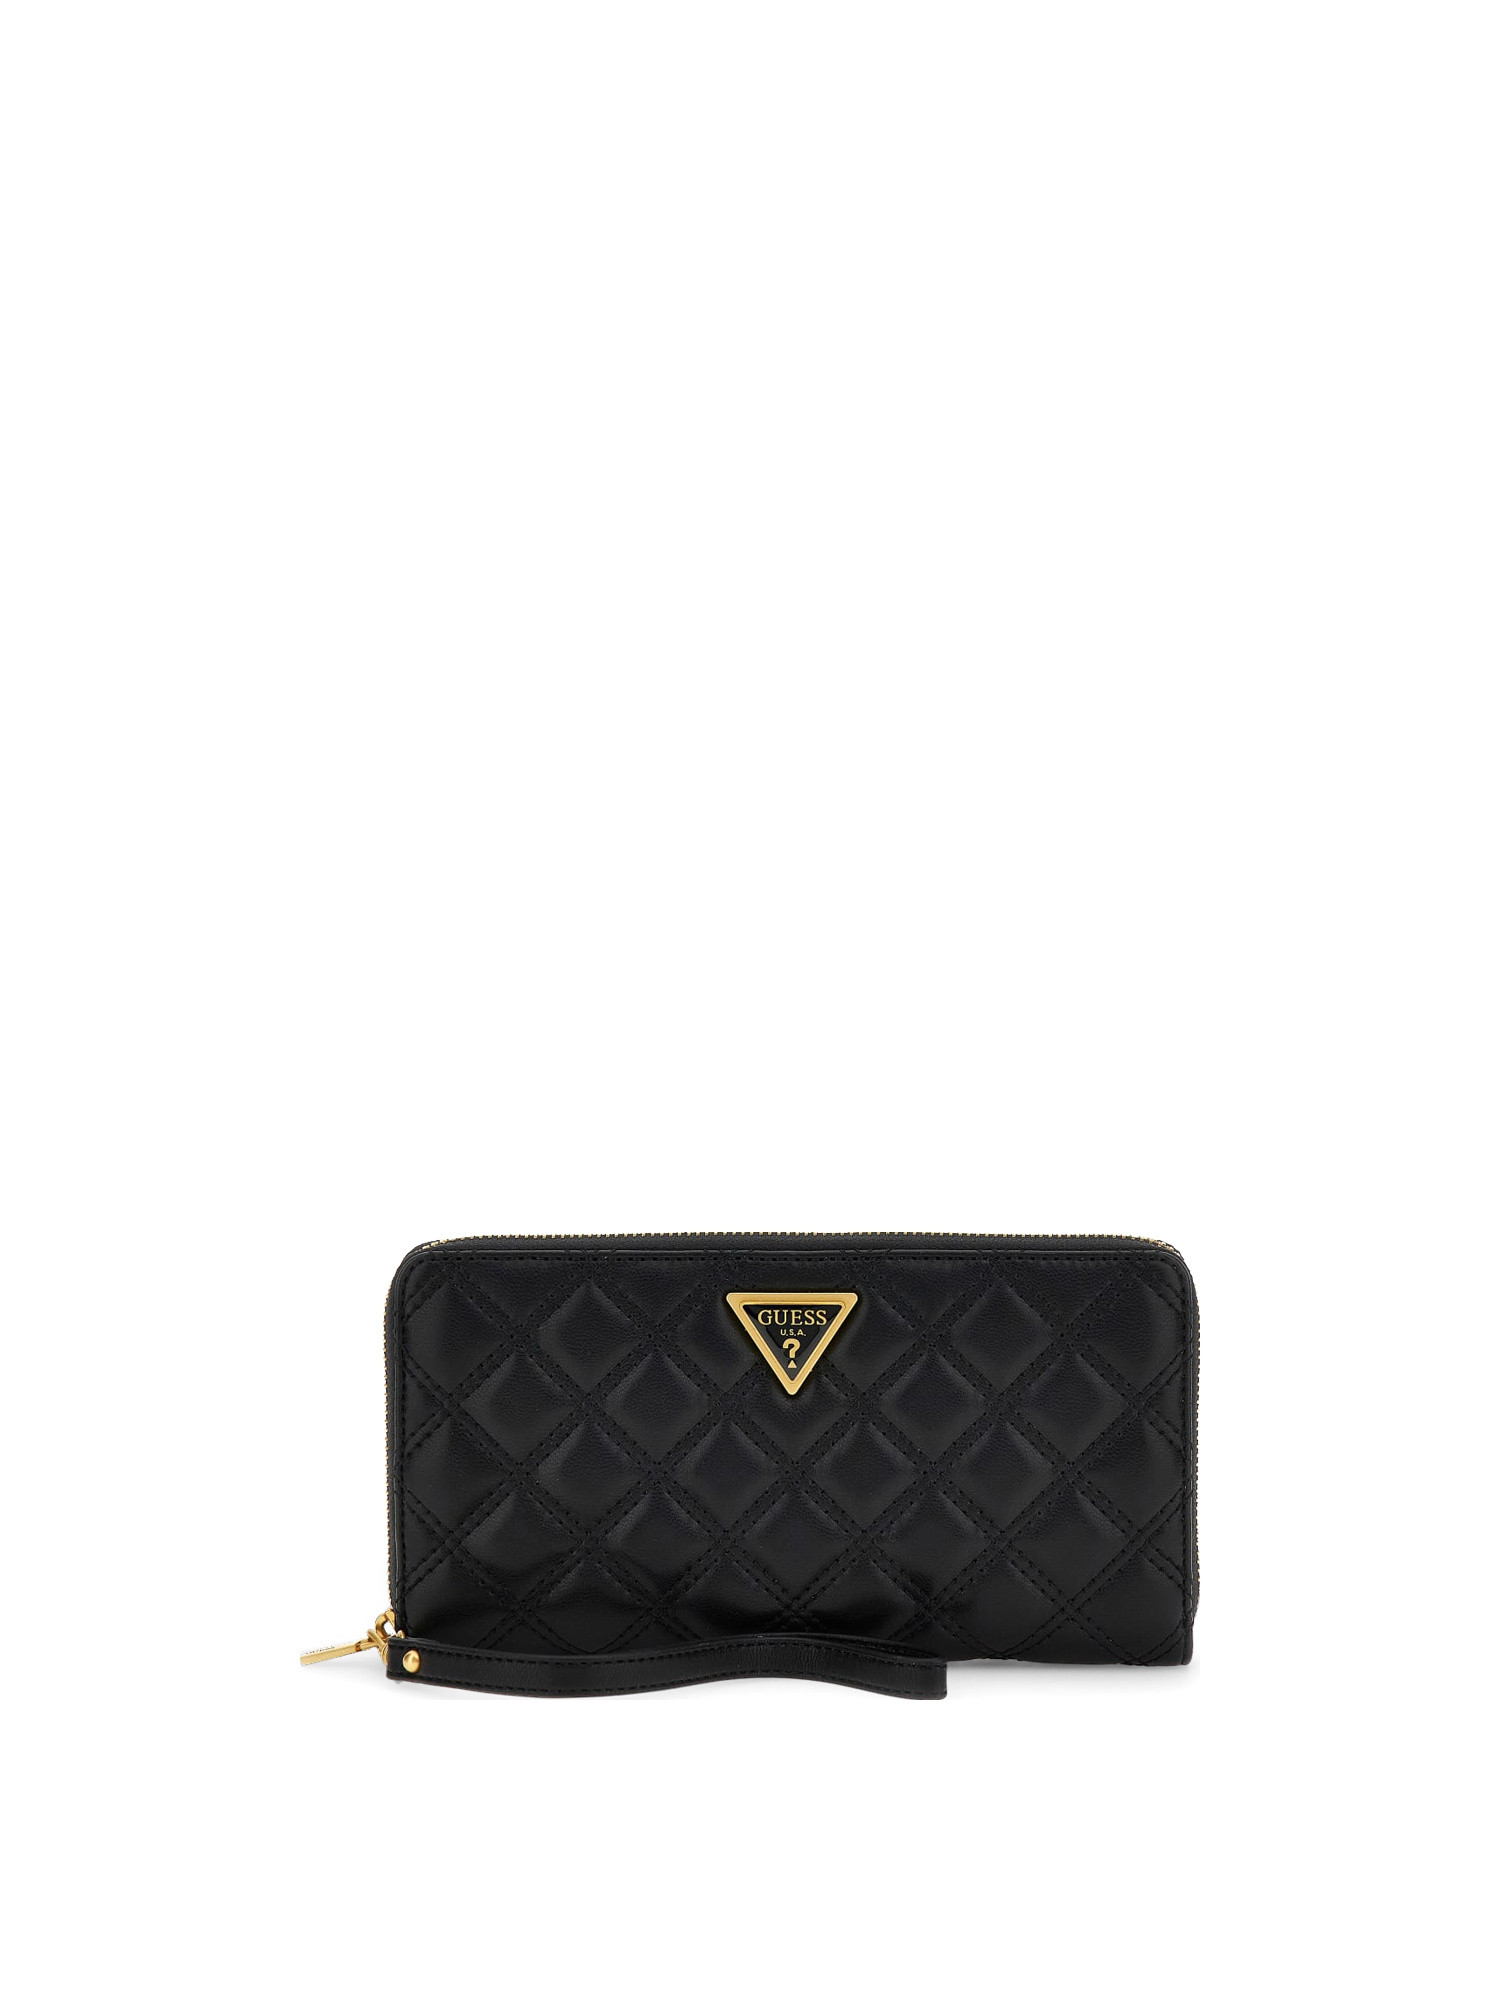 Guess - Giully maxi wallet, Black, large image number 0